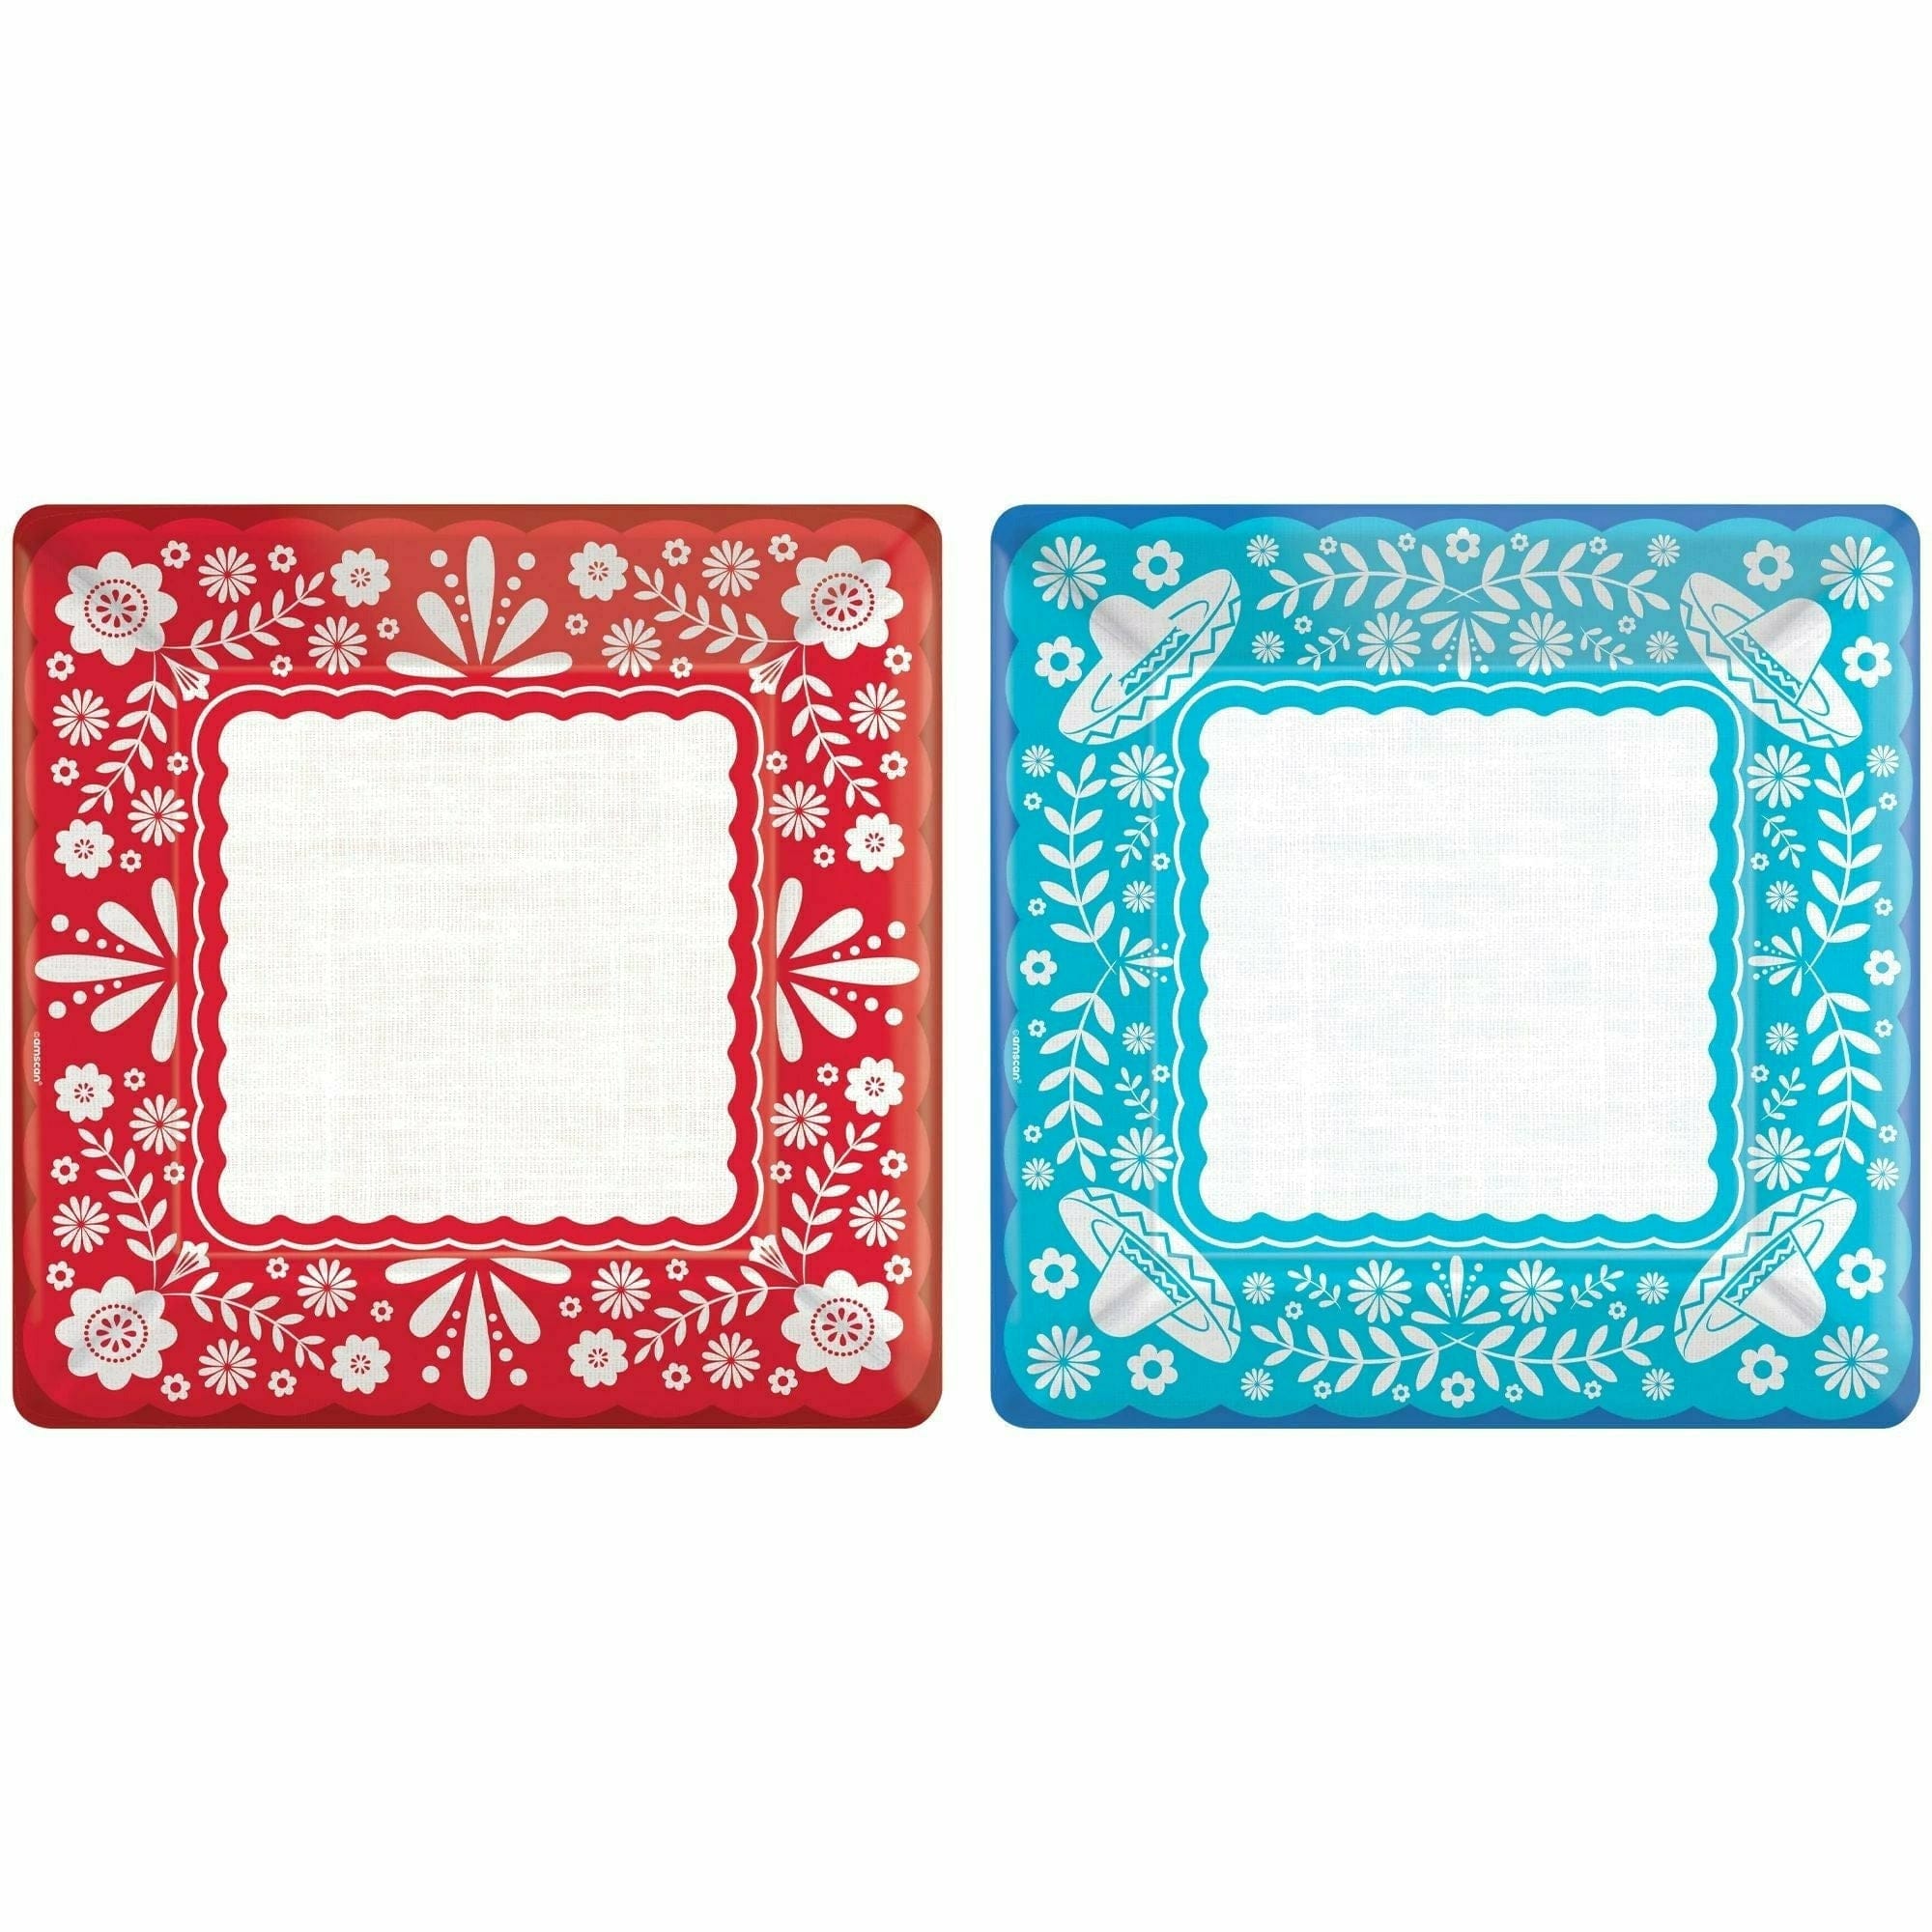 Amscan HOLIDAY: FIESTA Viva la Party Square Dinner Plates